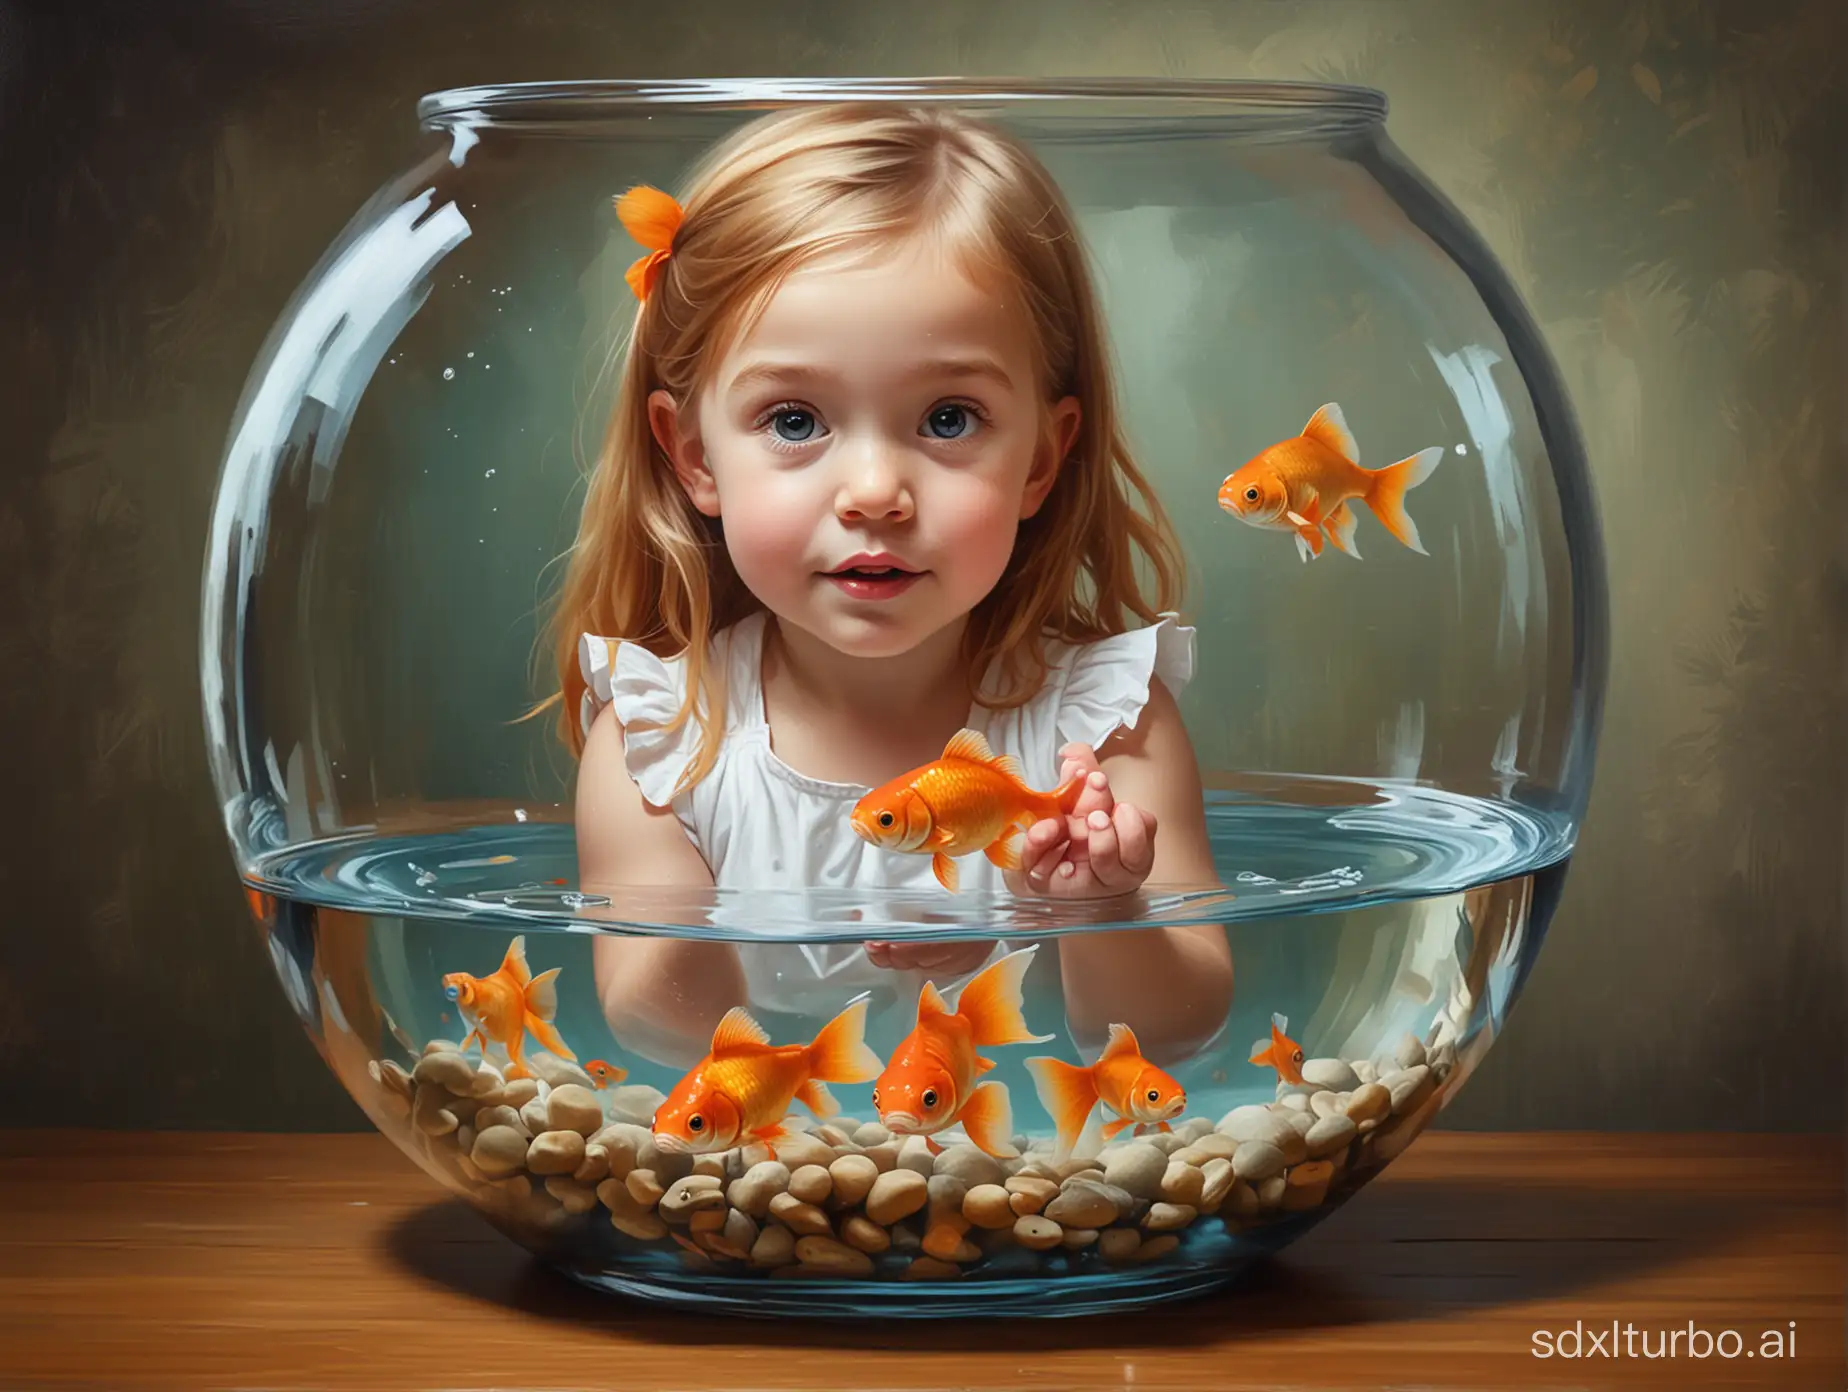 Create an image of an American little girl and her goldfish in a glass fish bowl. Oil painting style. Parody.